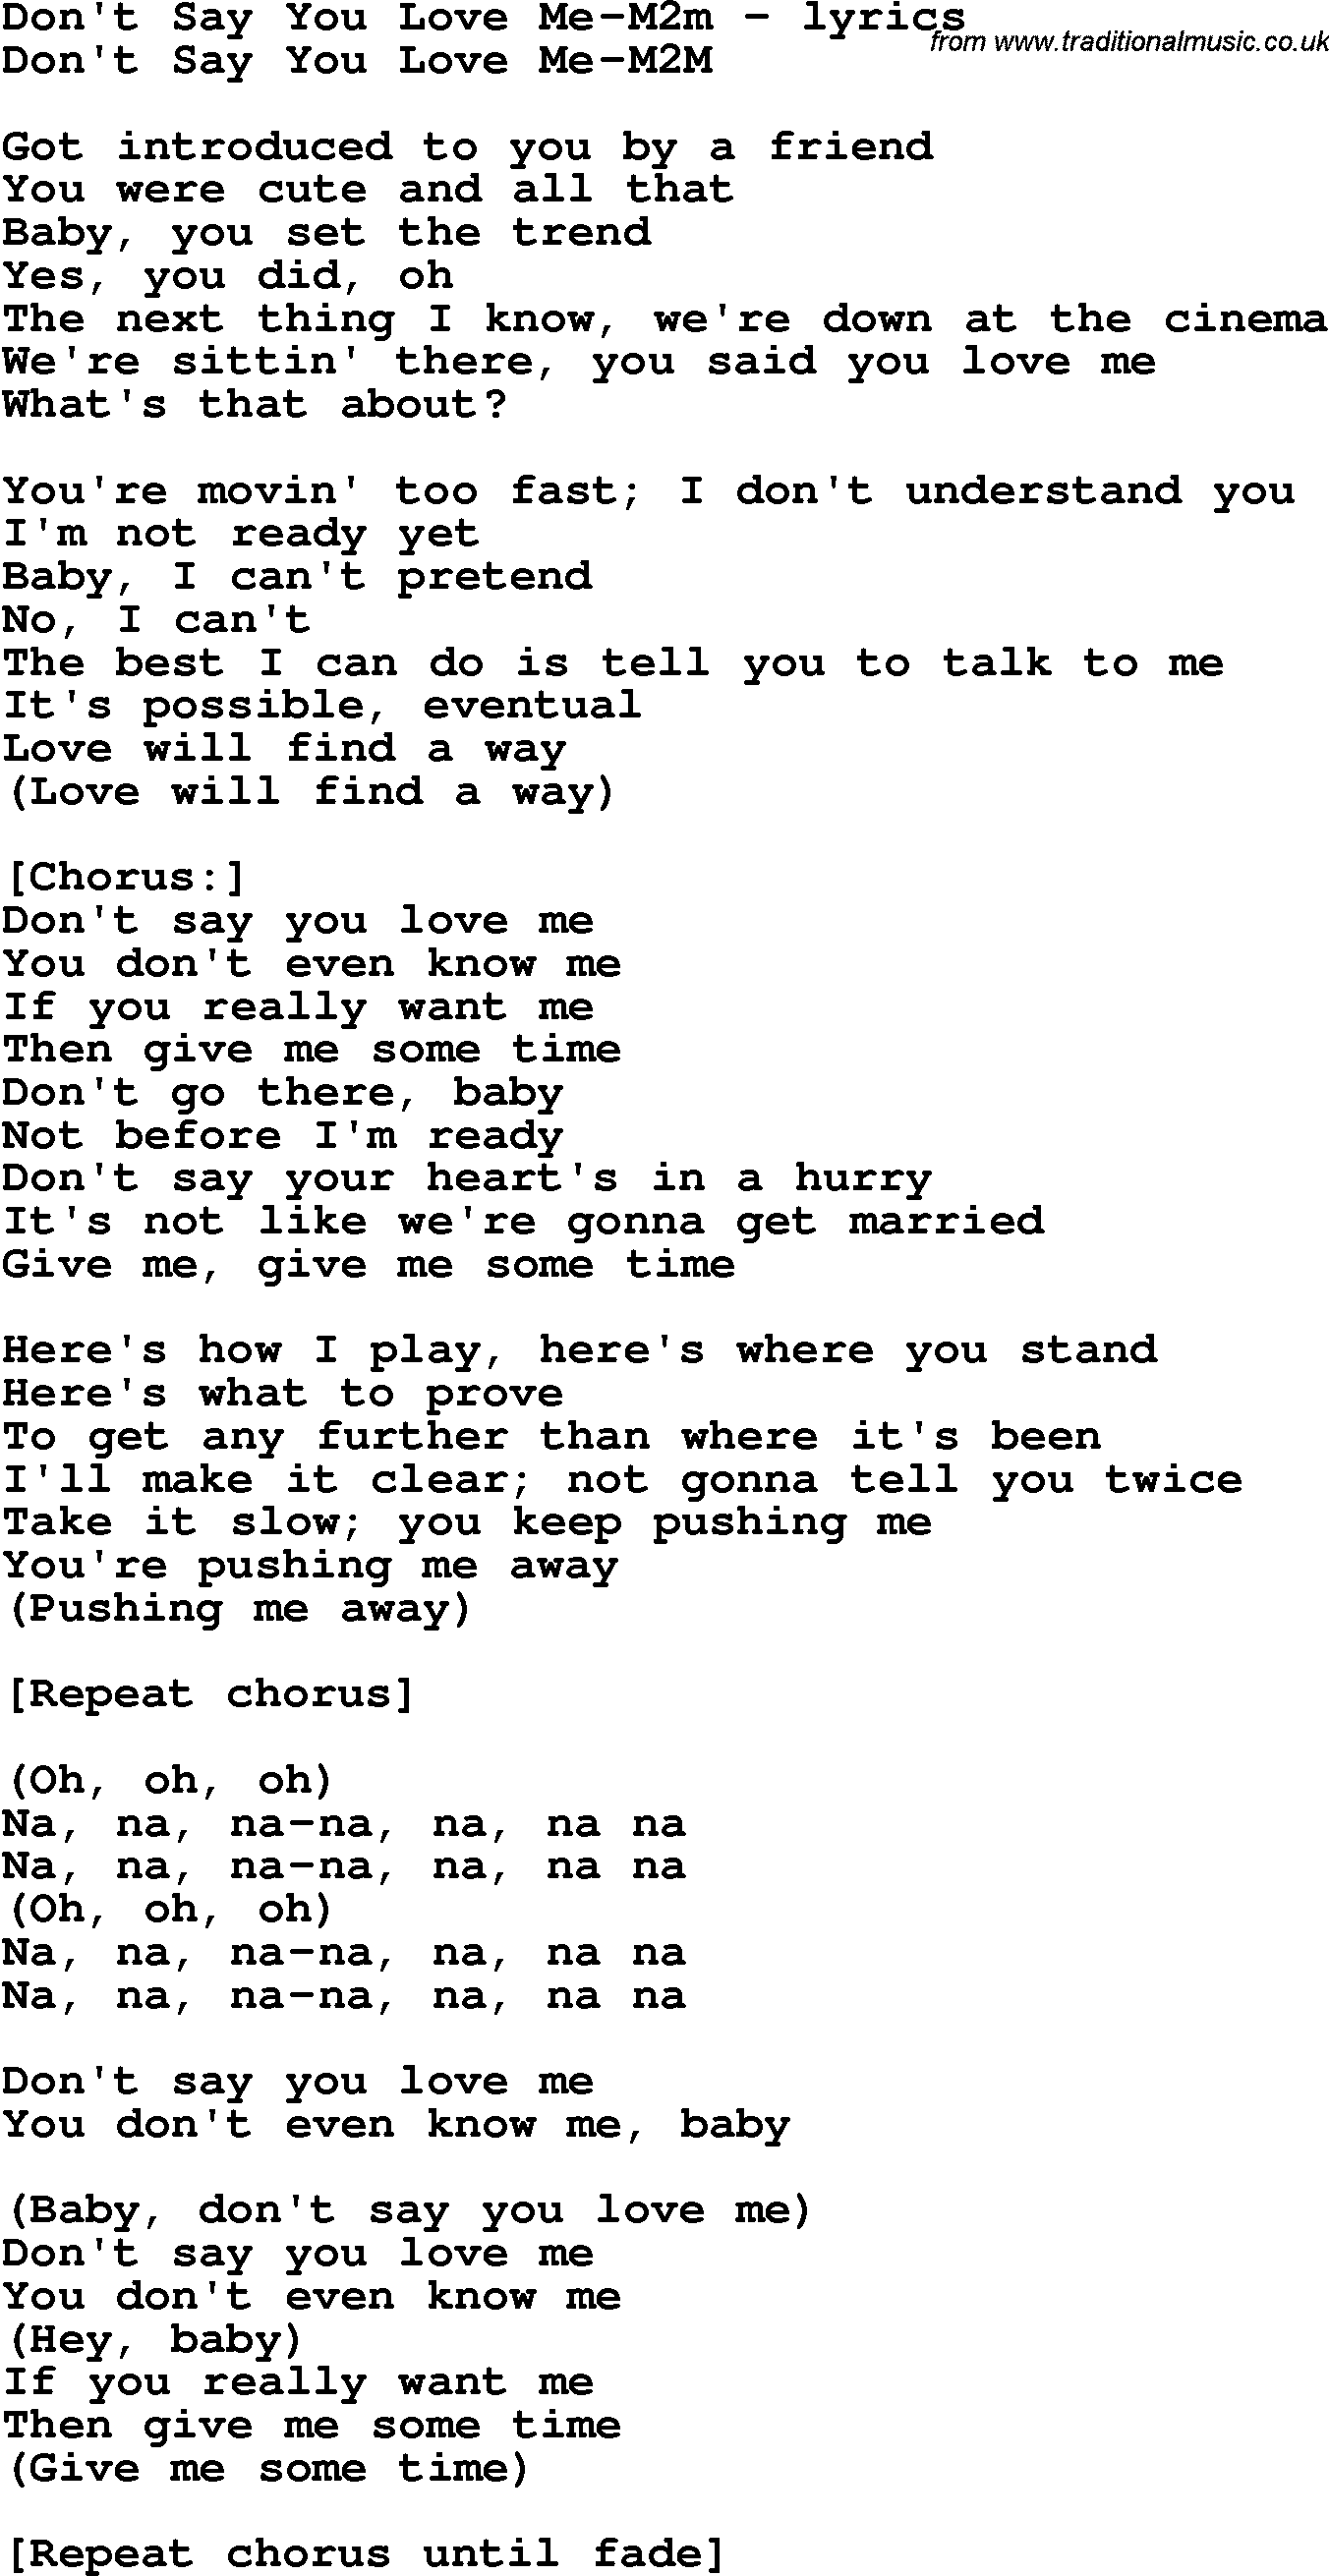 Love Song Lyrics for: Don't Say You Love Me-M2m